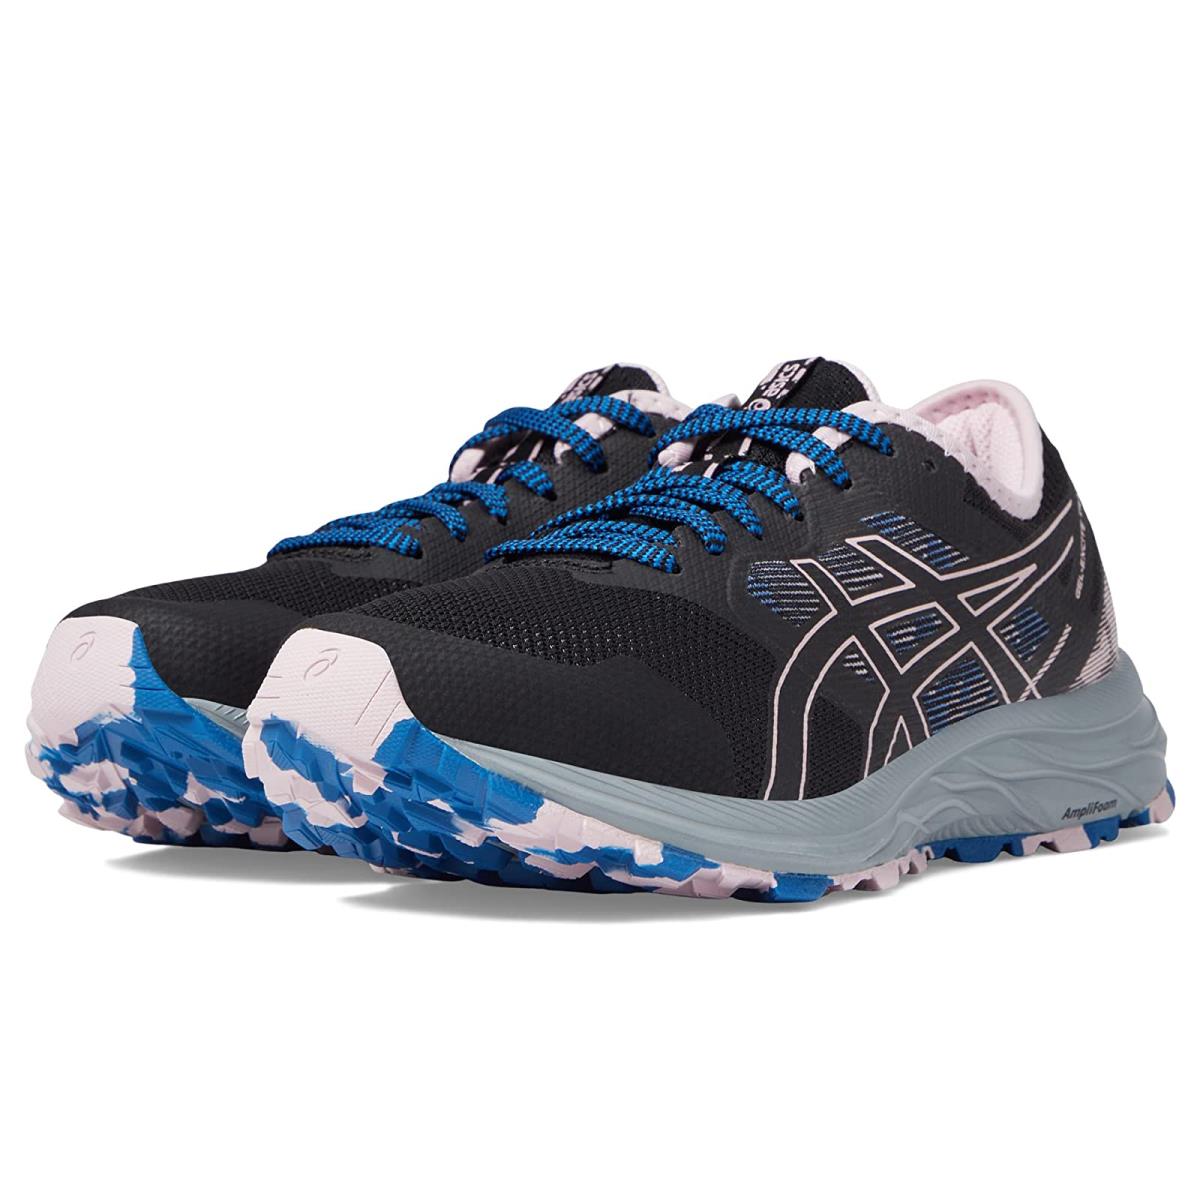 Woman`s Sneakers Athletic Shoes Asics Gel-excite Trail Black/Barely Rose